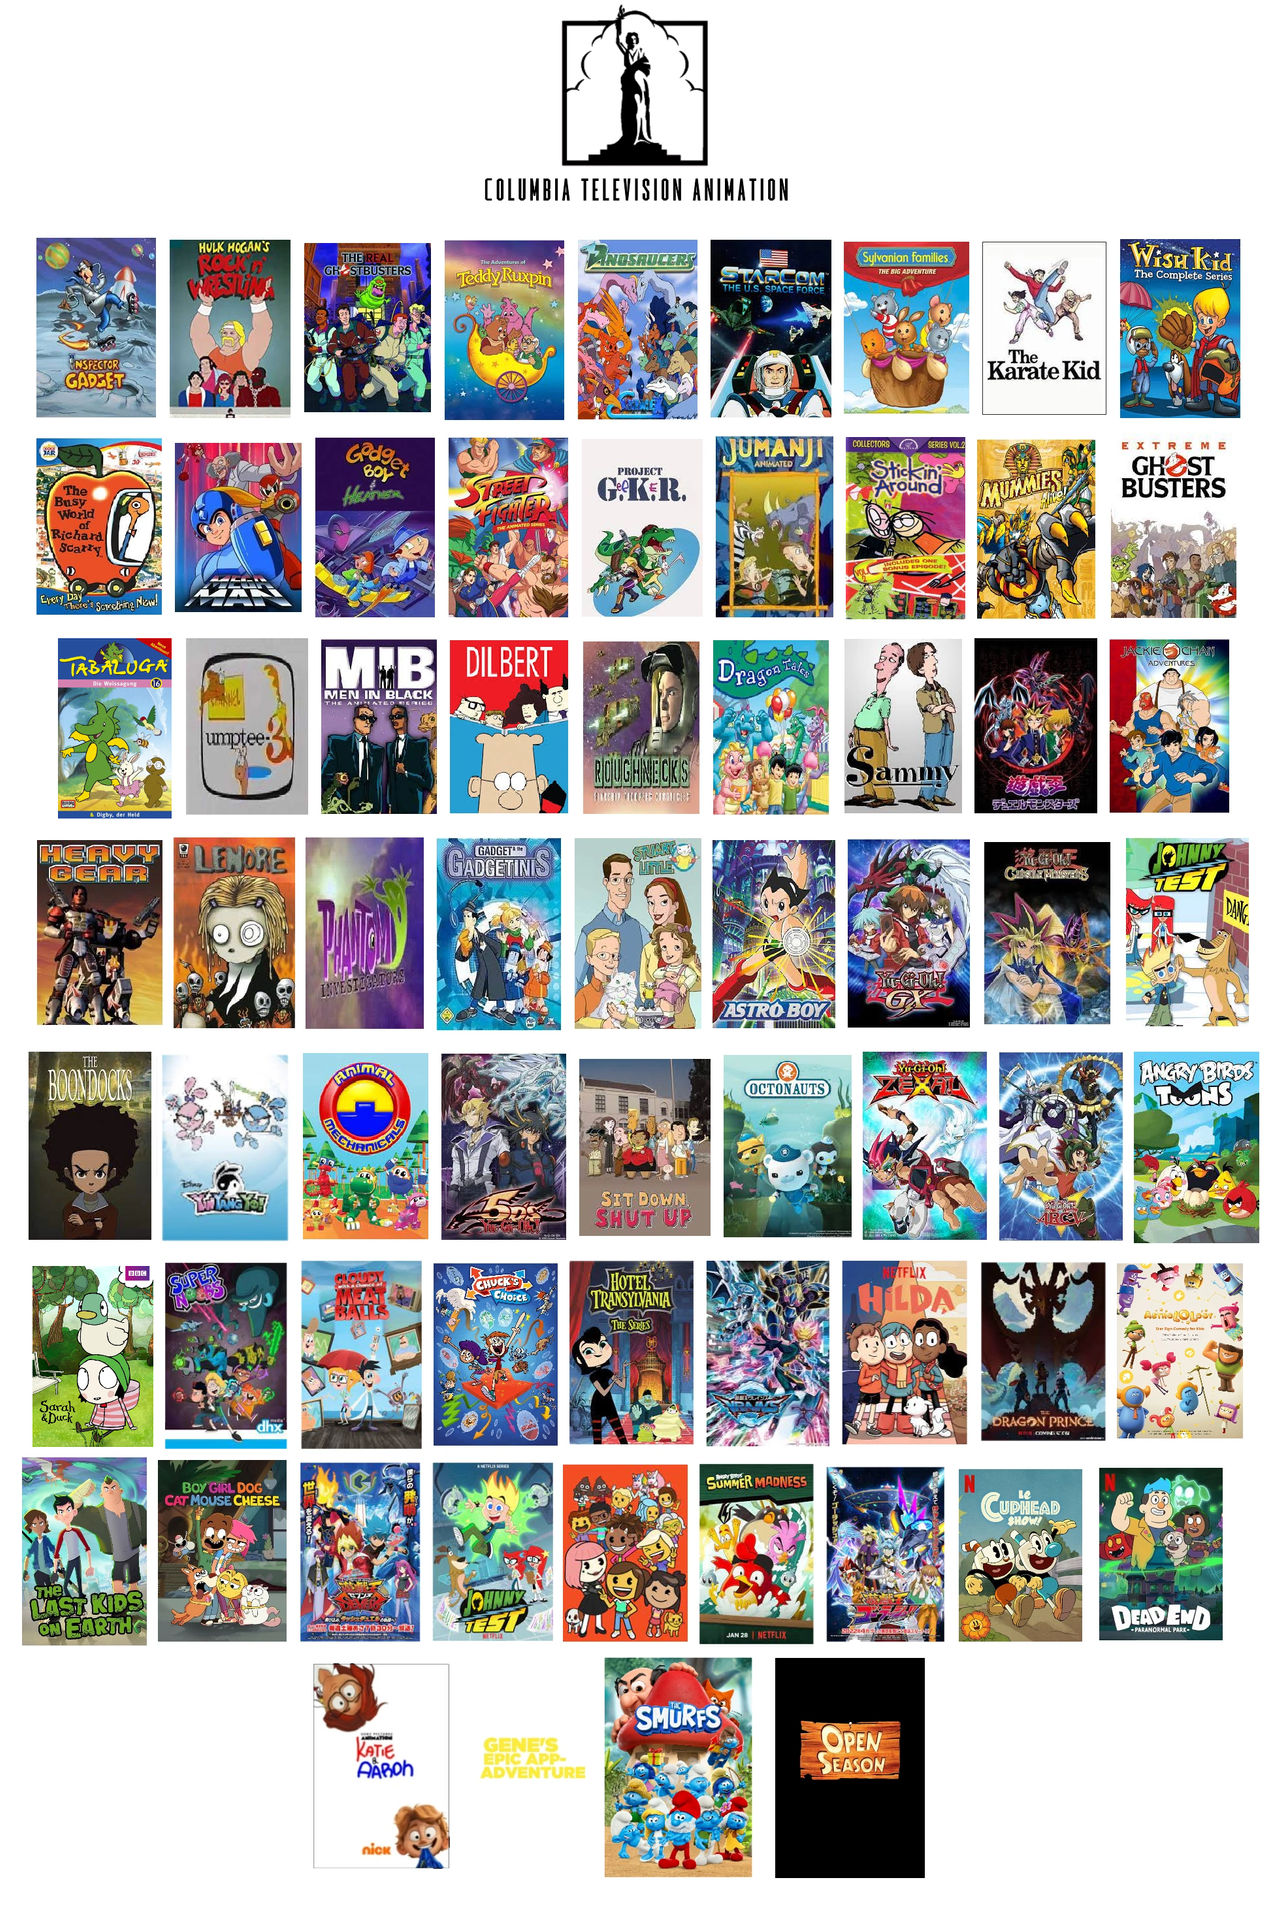 List of Columbia Television Animation Shows by Slurpp291 on DeviantArt